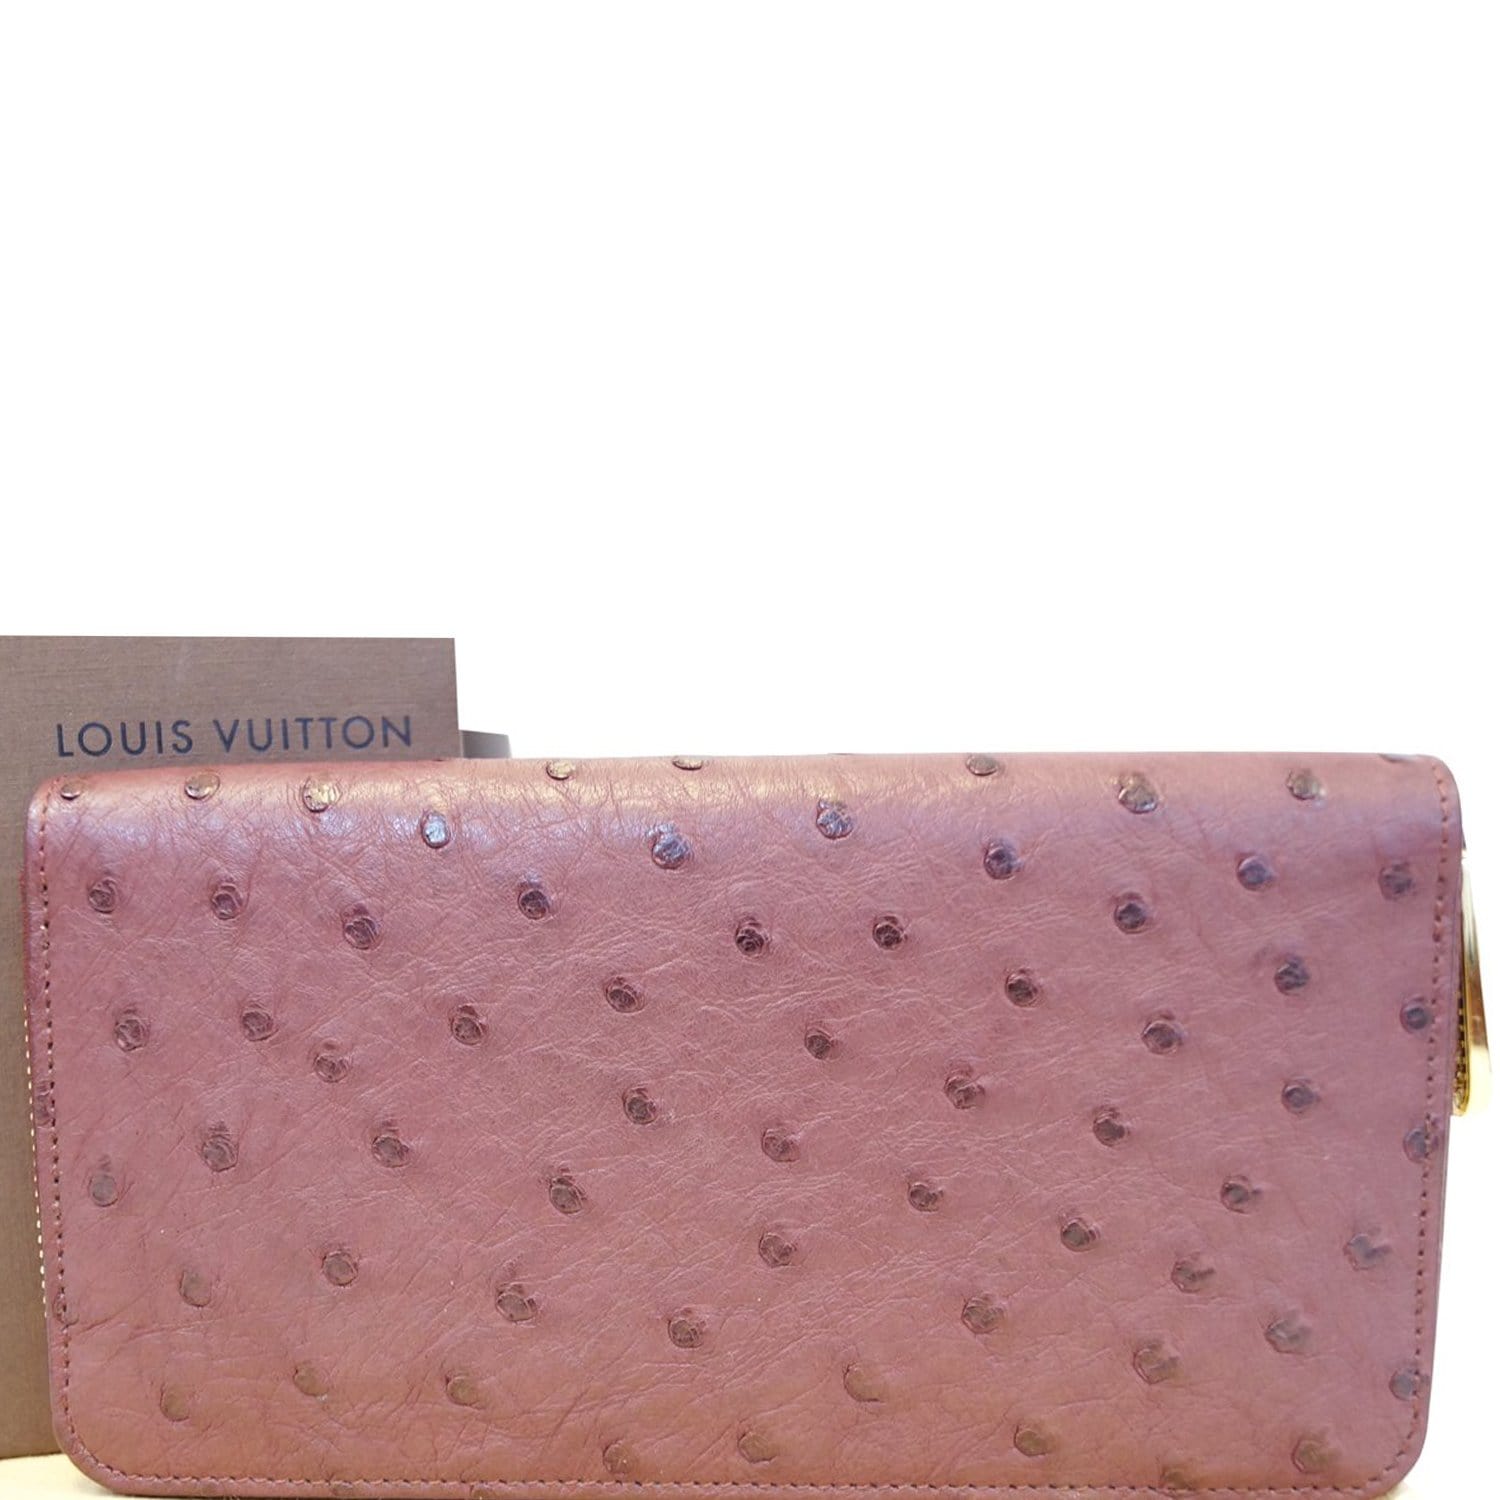 Louis Vuitton Zippy Wallet Burgundy Patent Leather Wallet (Pre-Owned)